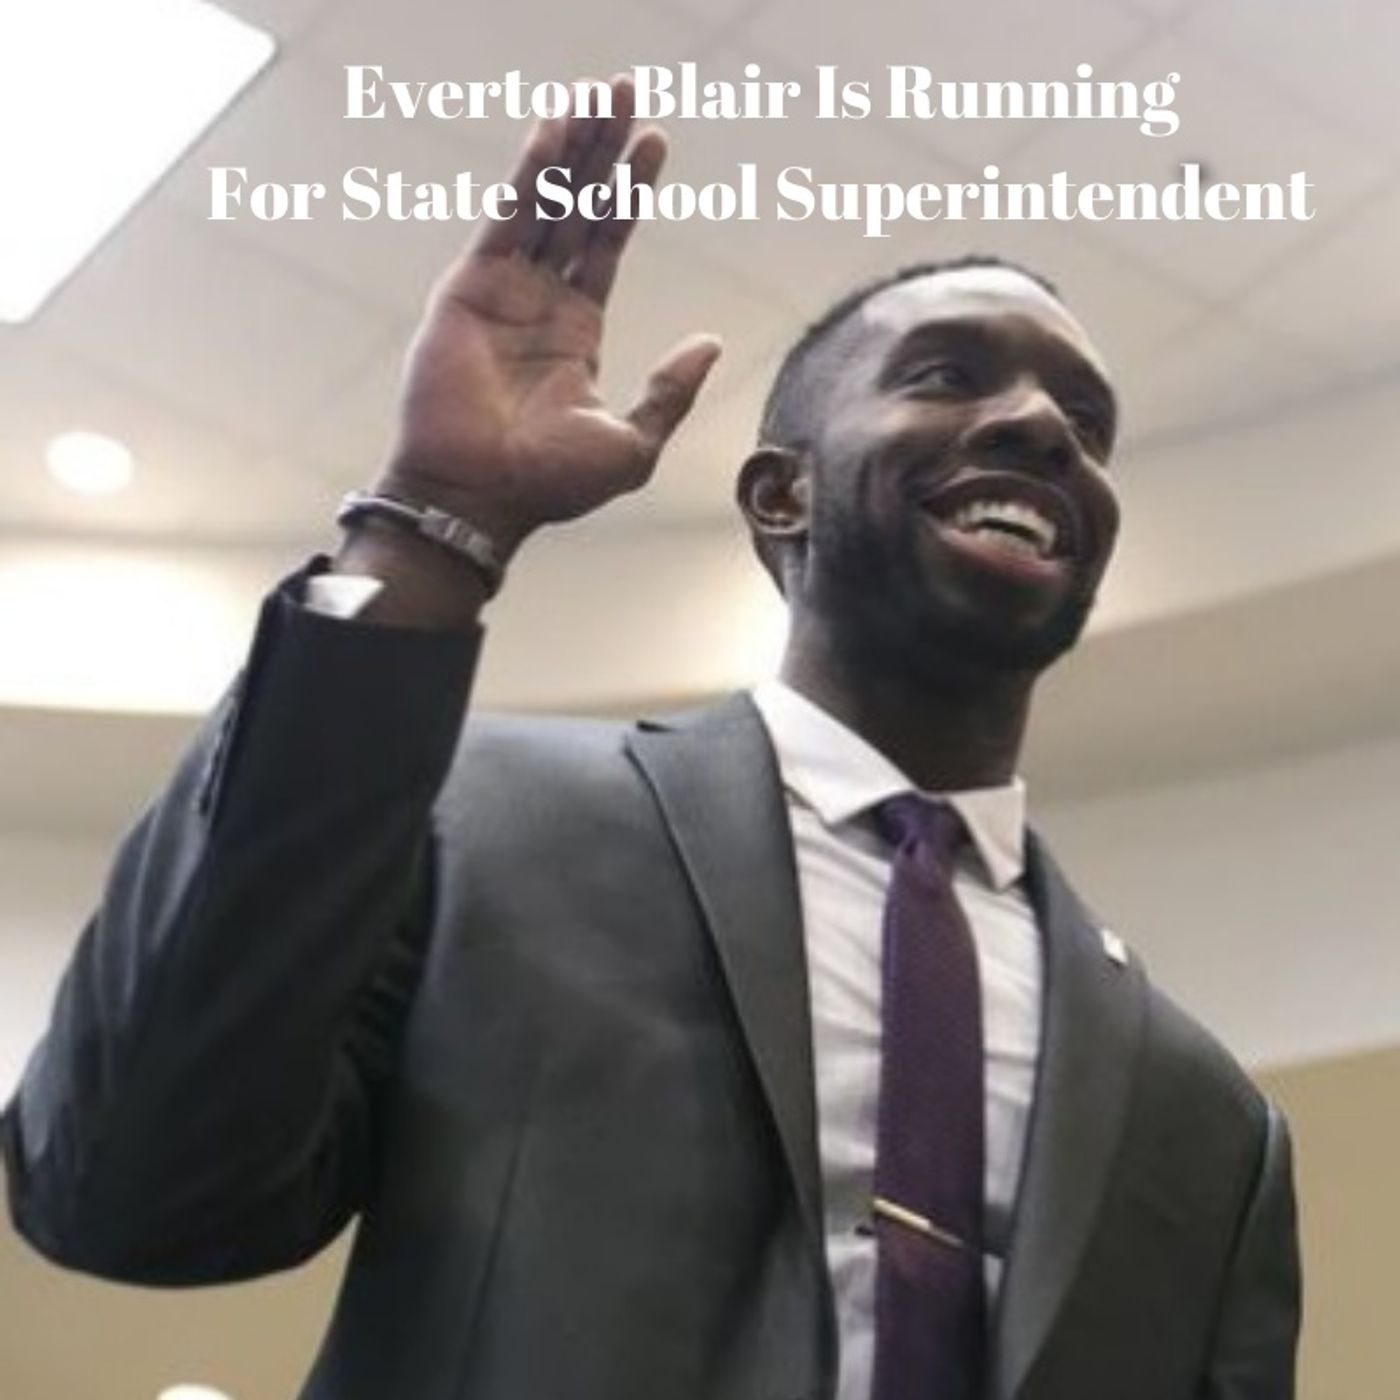 Everton Blair Steps Down, Then Steps Into The State Race